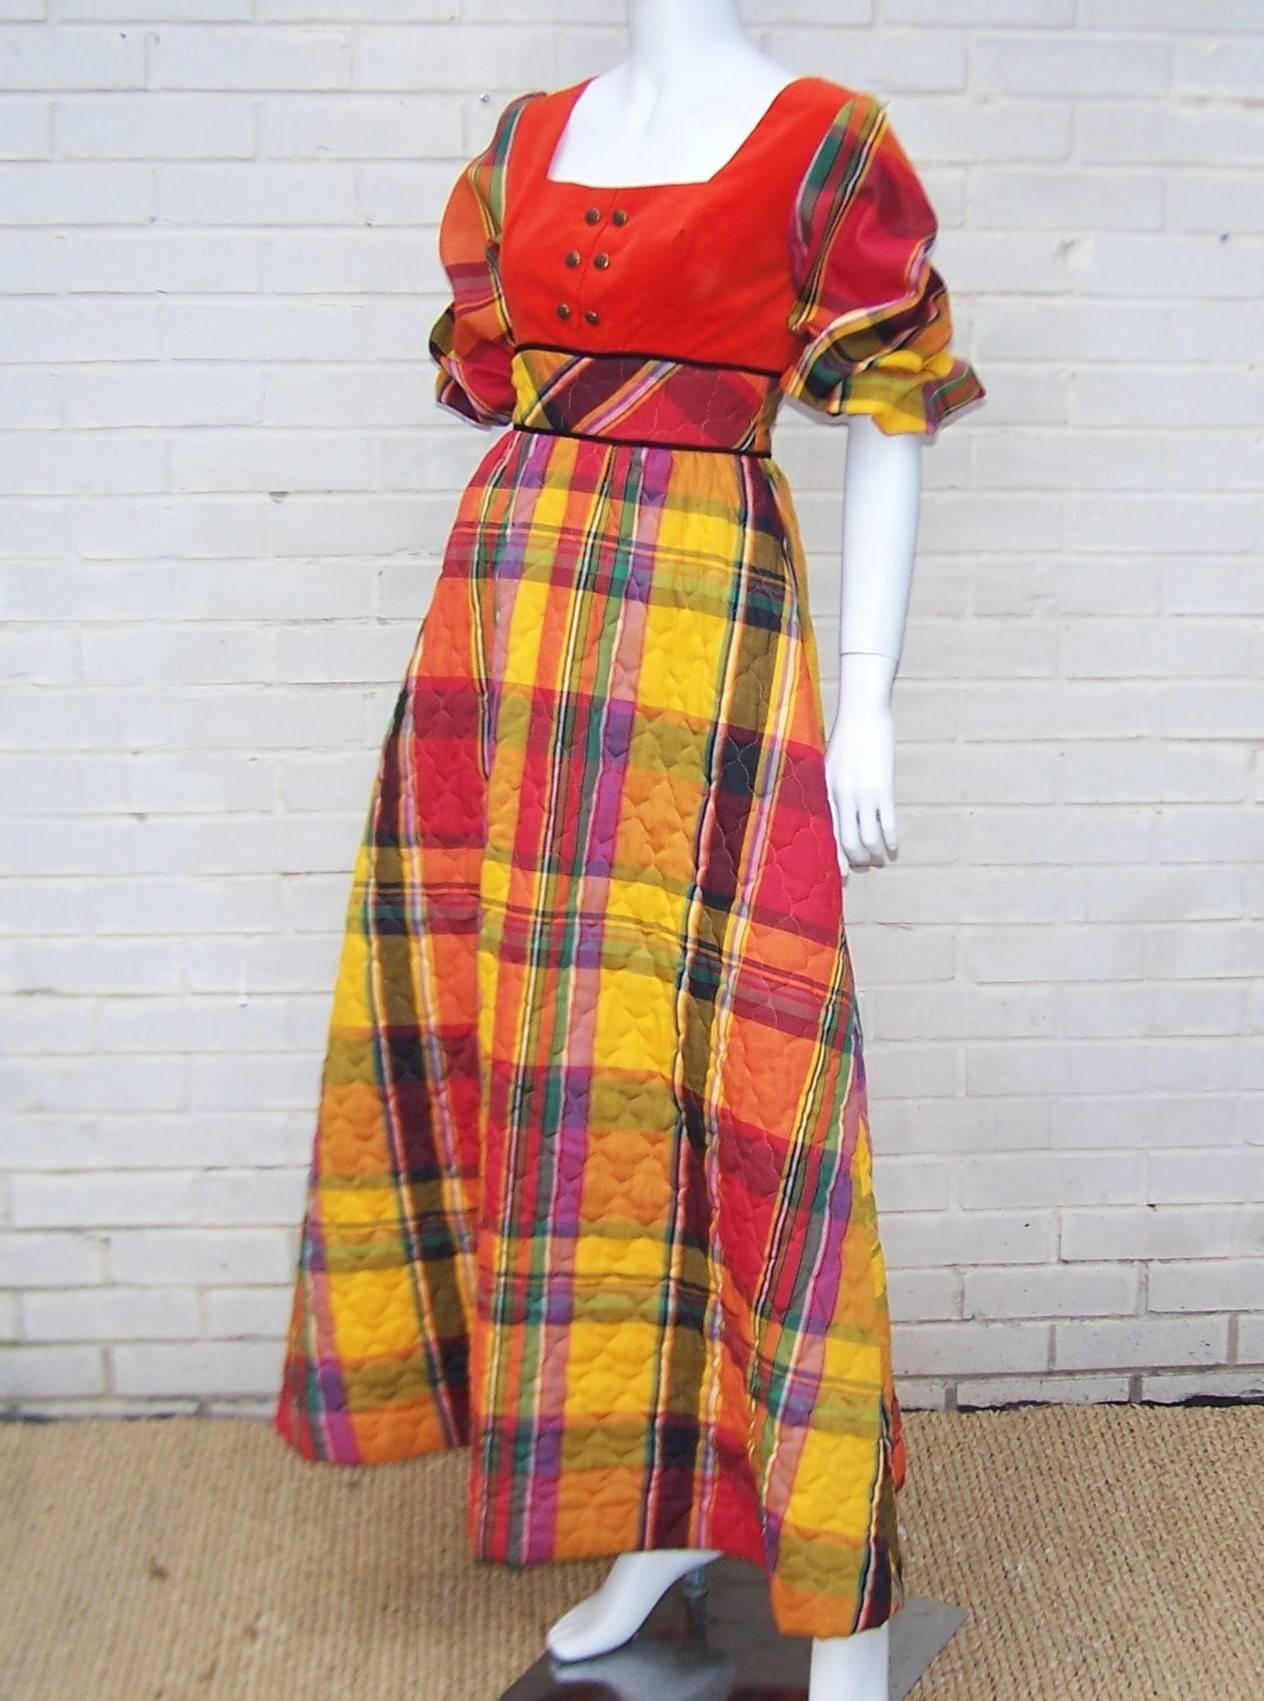 Only Saks Fifth Avenue could whip a plaid quilted bedspread up into an adorable hostess dress fit for entertaining or just relaxing by the fire.  The velvet bodice is fitted and embellished with mirror backed metal buttons while the full a-line